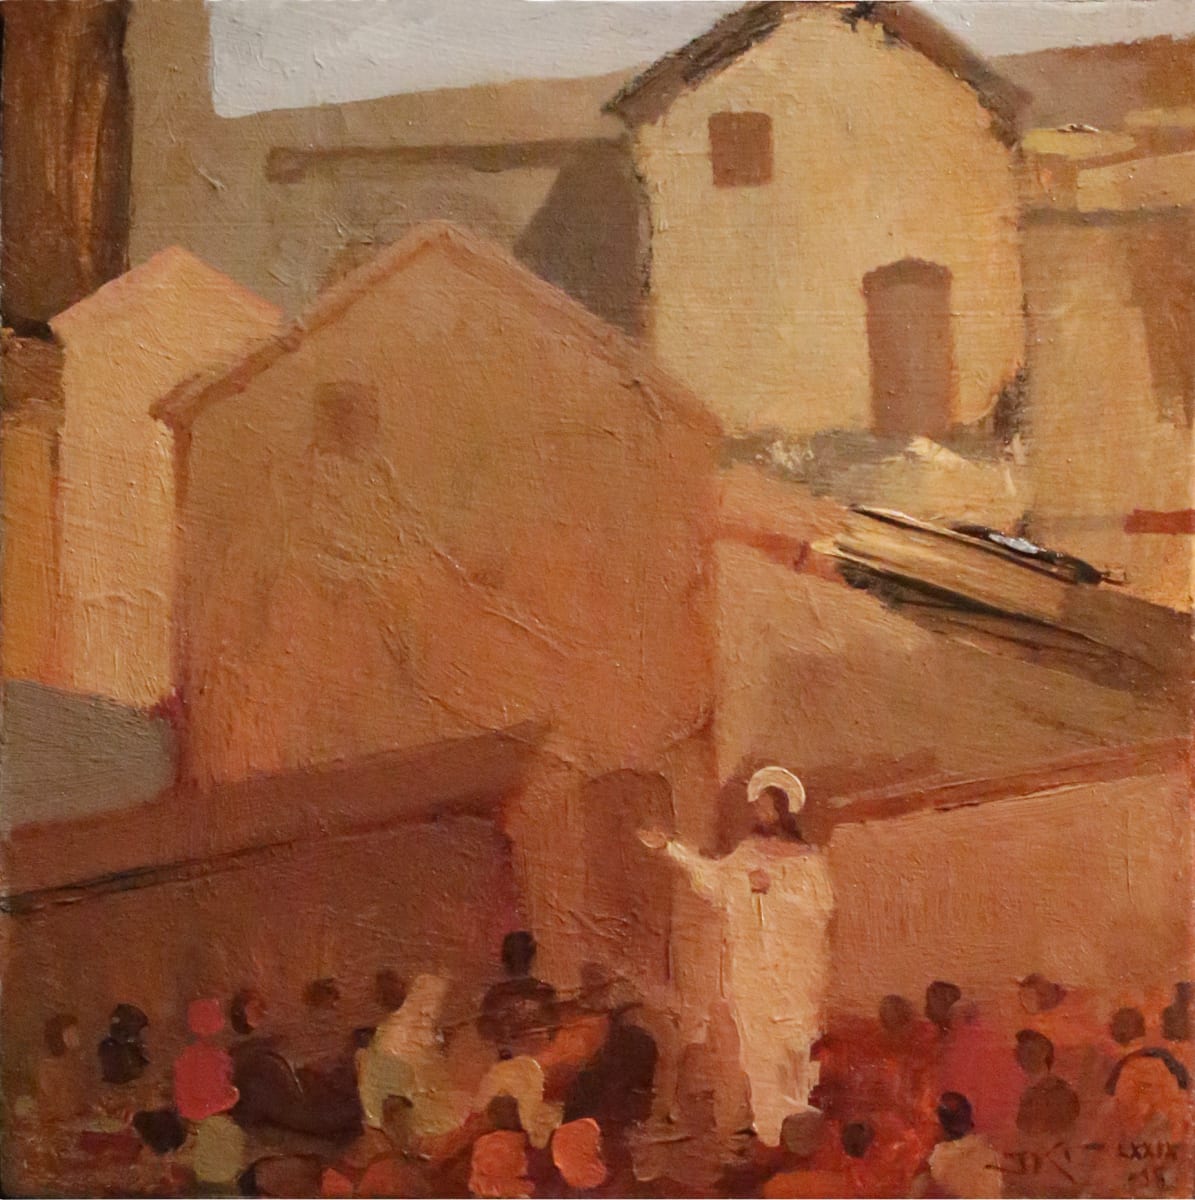 Many Mansions by J. Kirk Richards  Image: Christ preaching to the multitude. 
Daily Painting 95, 2018. 